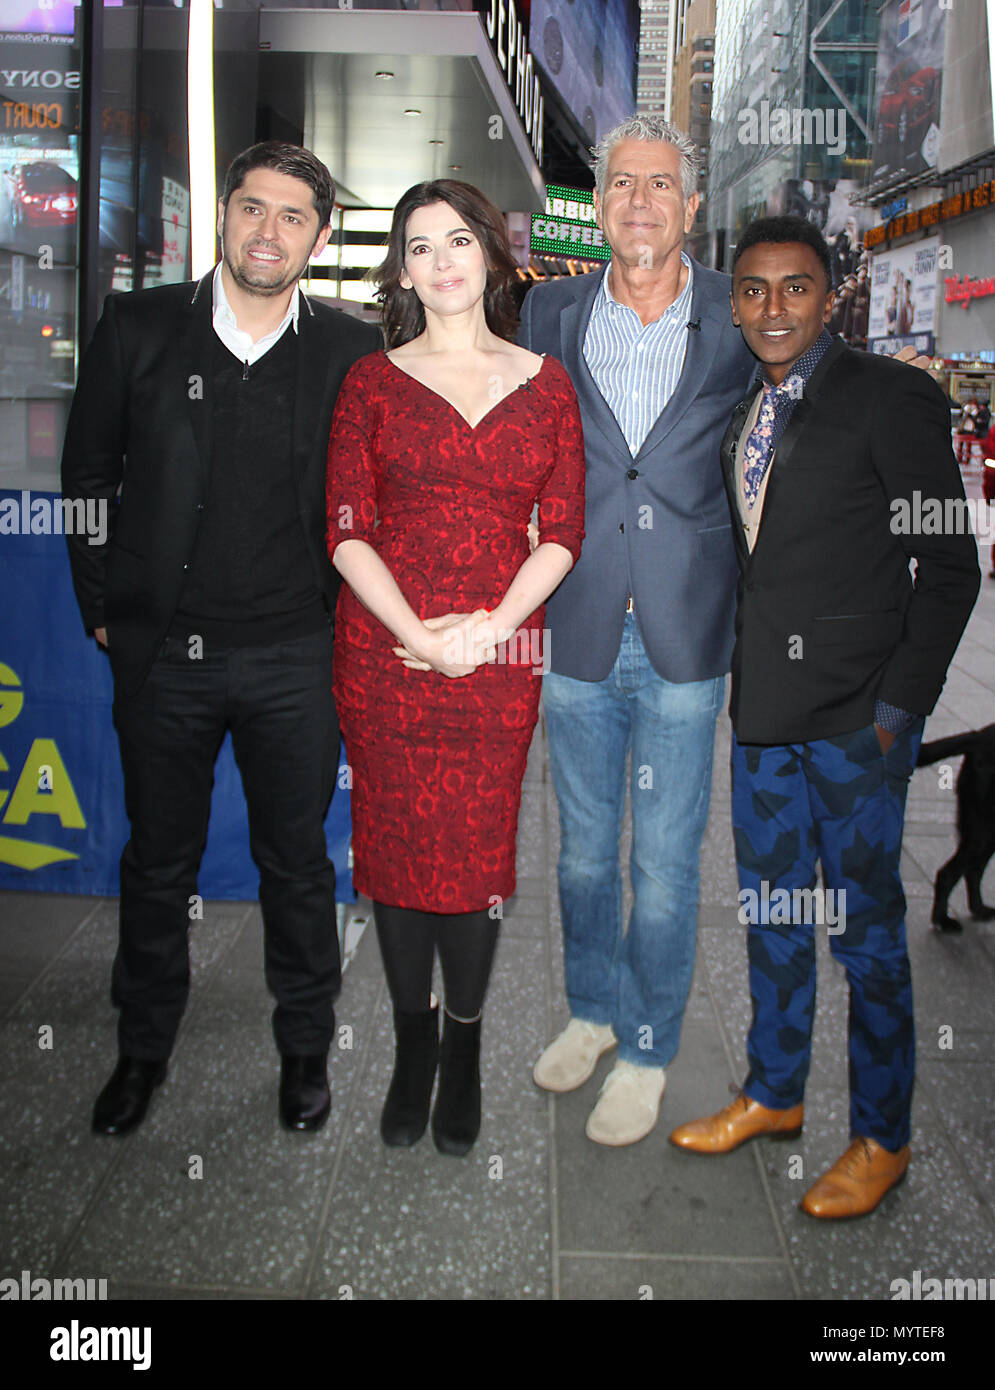 ***FILE PHOTO*** Anthony Bourdain Dead of Apparent Suicide December 02, 2014: Ludo Lefebvre, Nigella Lawson, Anthony Bourdain, Marcus Samuelsson at Good Morning America to talk about the 3rd season of the Taste in New York. Credit:RW/MediaPunch Stock Photo